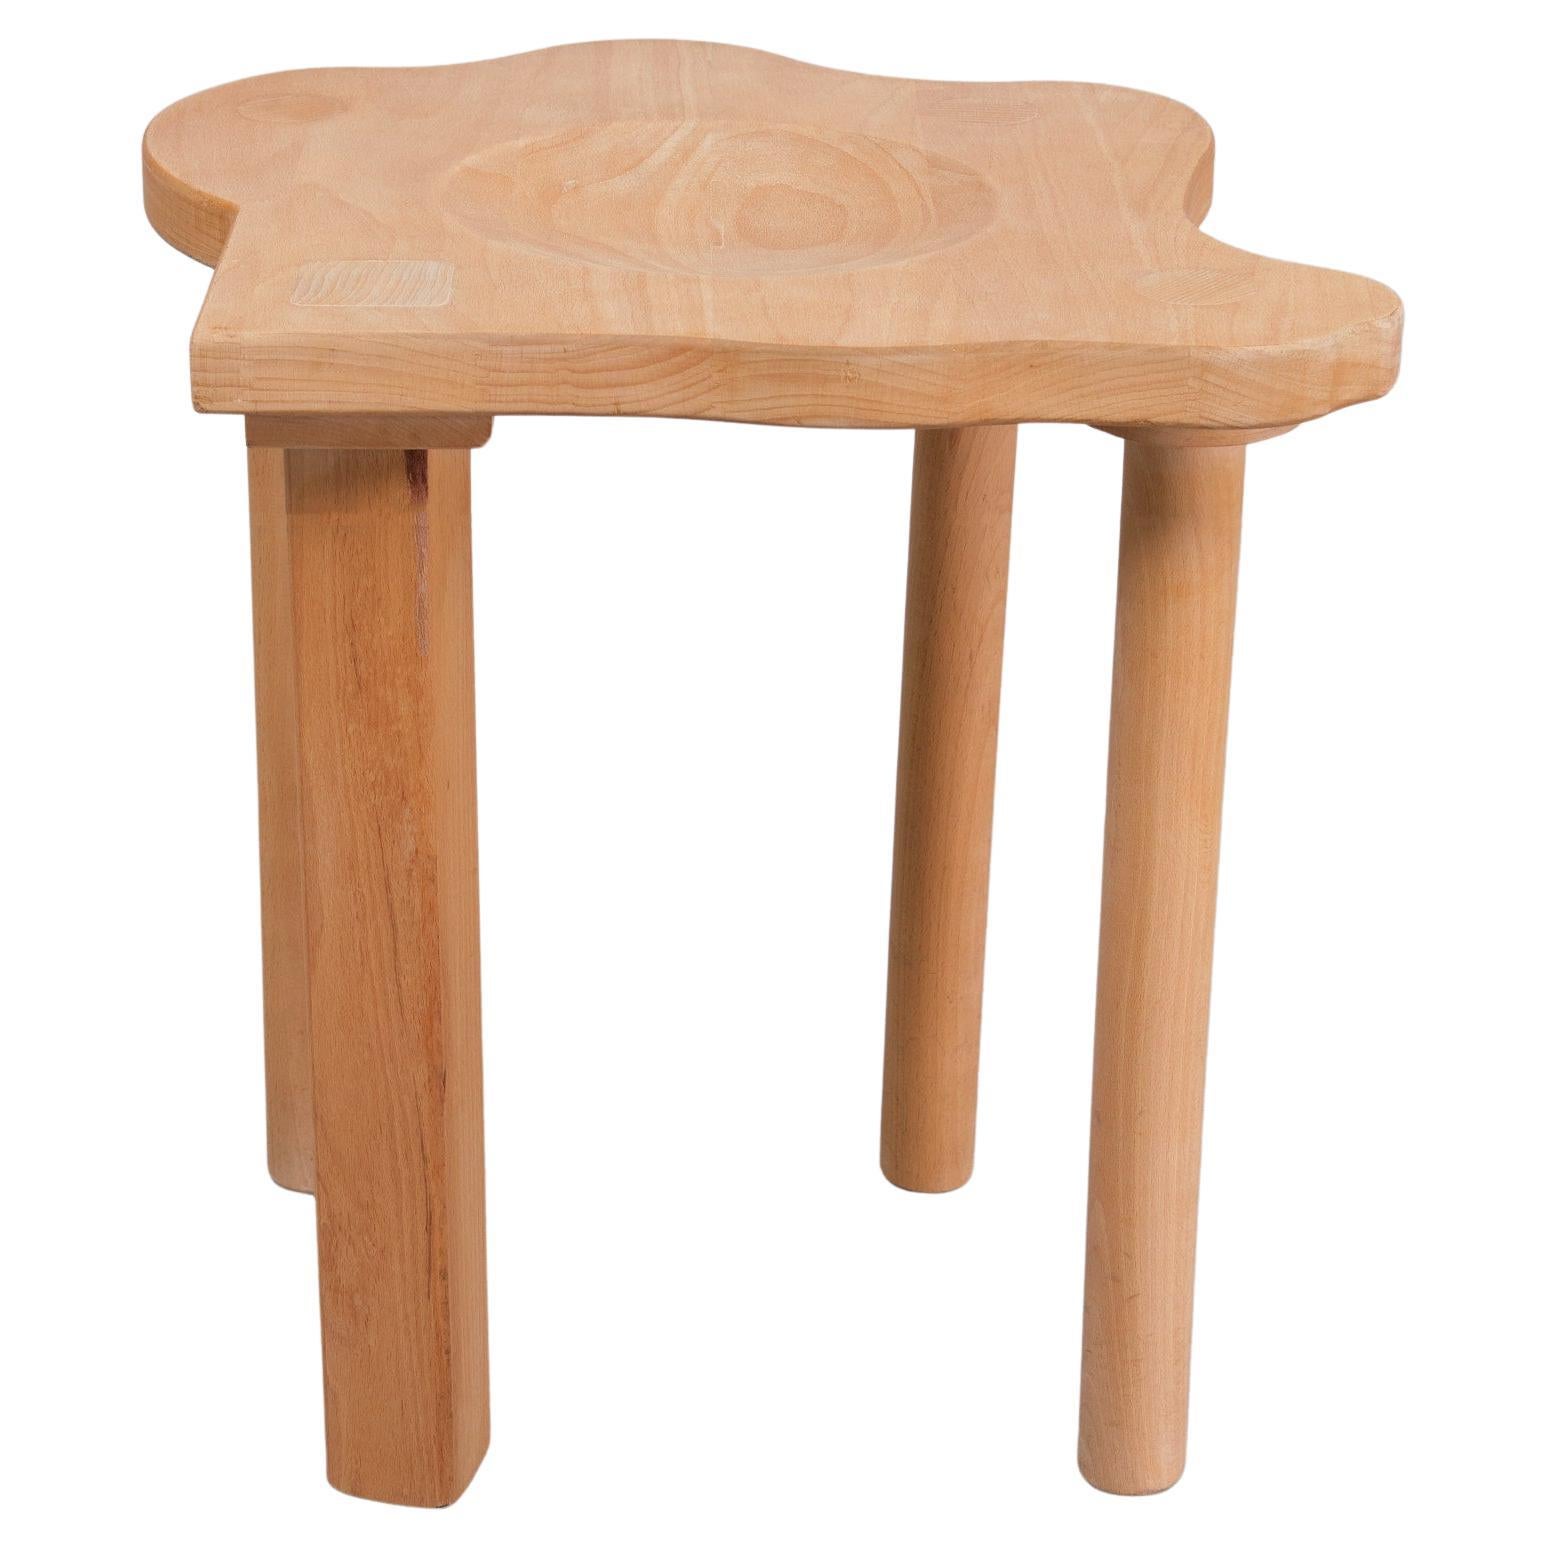 Very nice Post Modern solid Oak stool . Manufactured  by E.R.A. Herbstb 
1980s Germany .